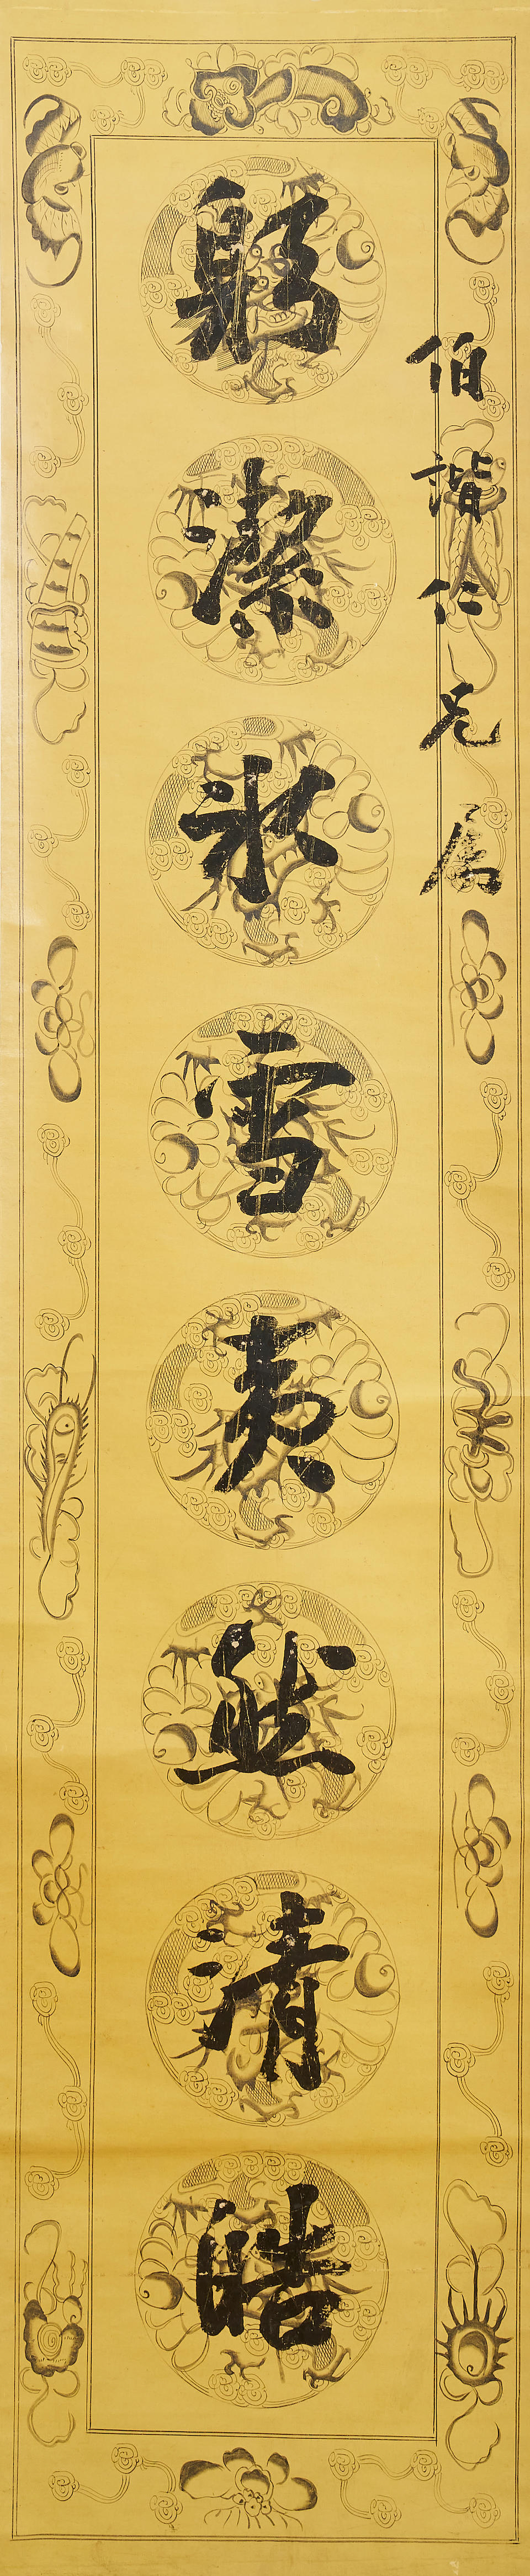 Fang Jingyi (1840-?) and Xu Zhu (19th/ 20th century) Calligraphy Couplet in Running Style (2) - Image 3 of 3